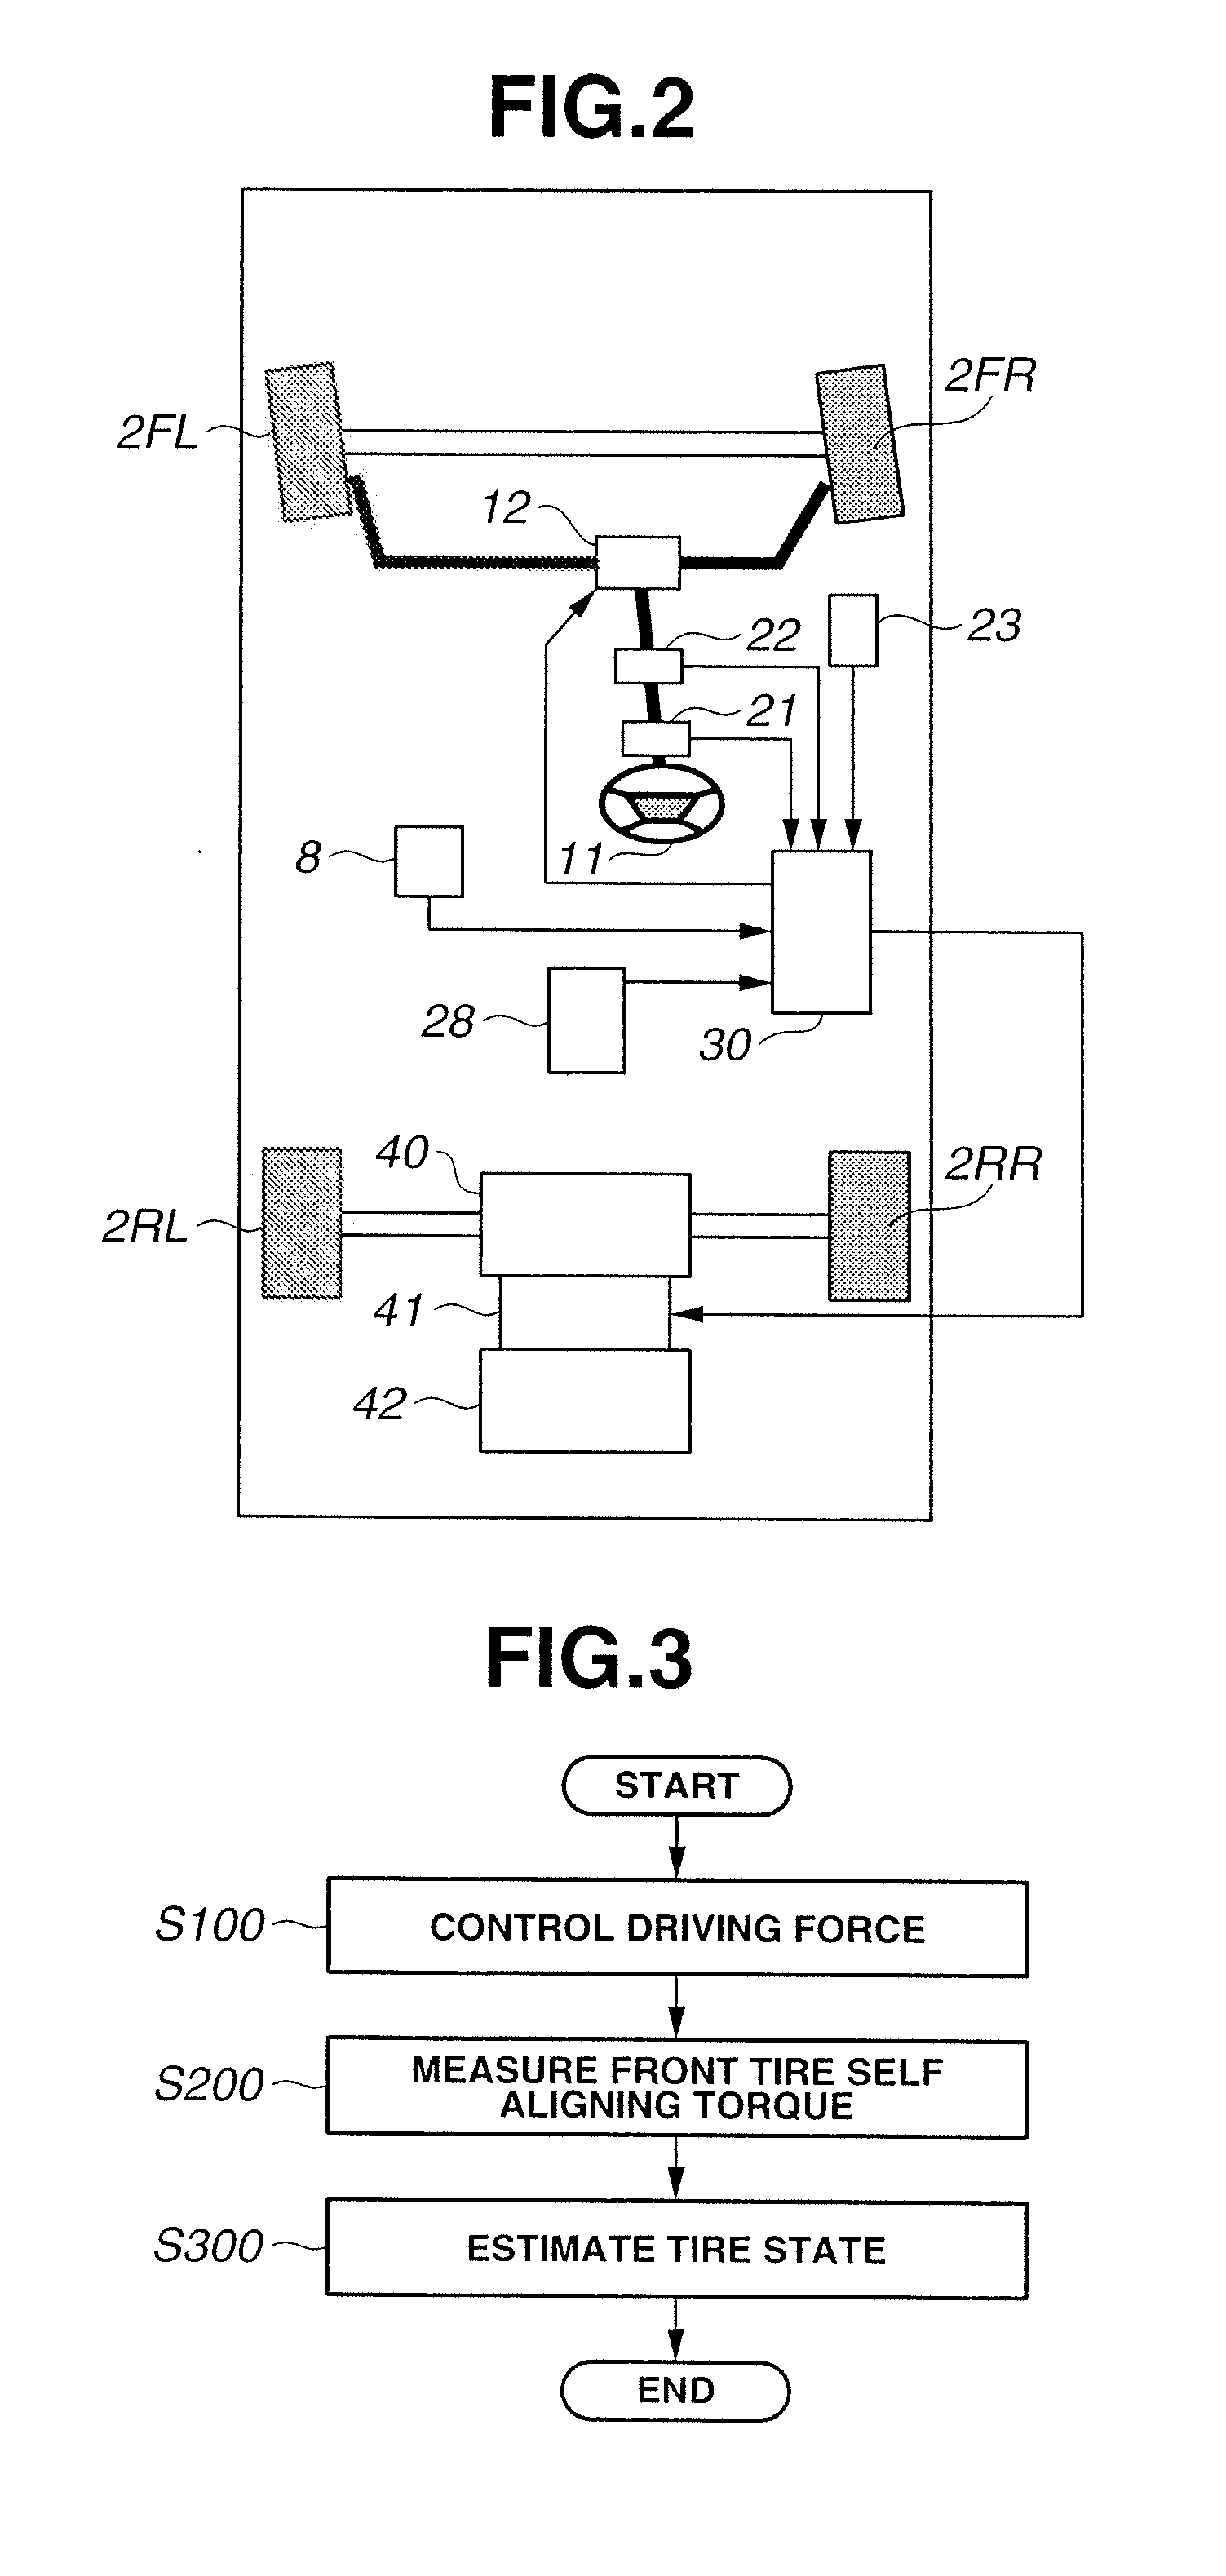 Tire state estimator and tire state estimation method